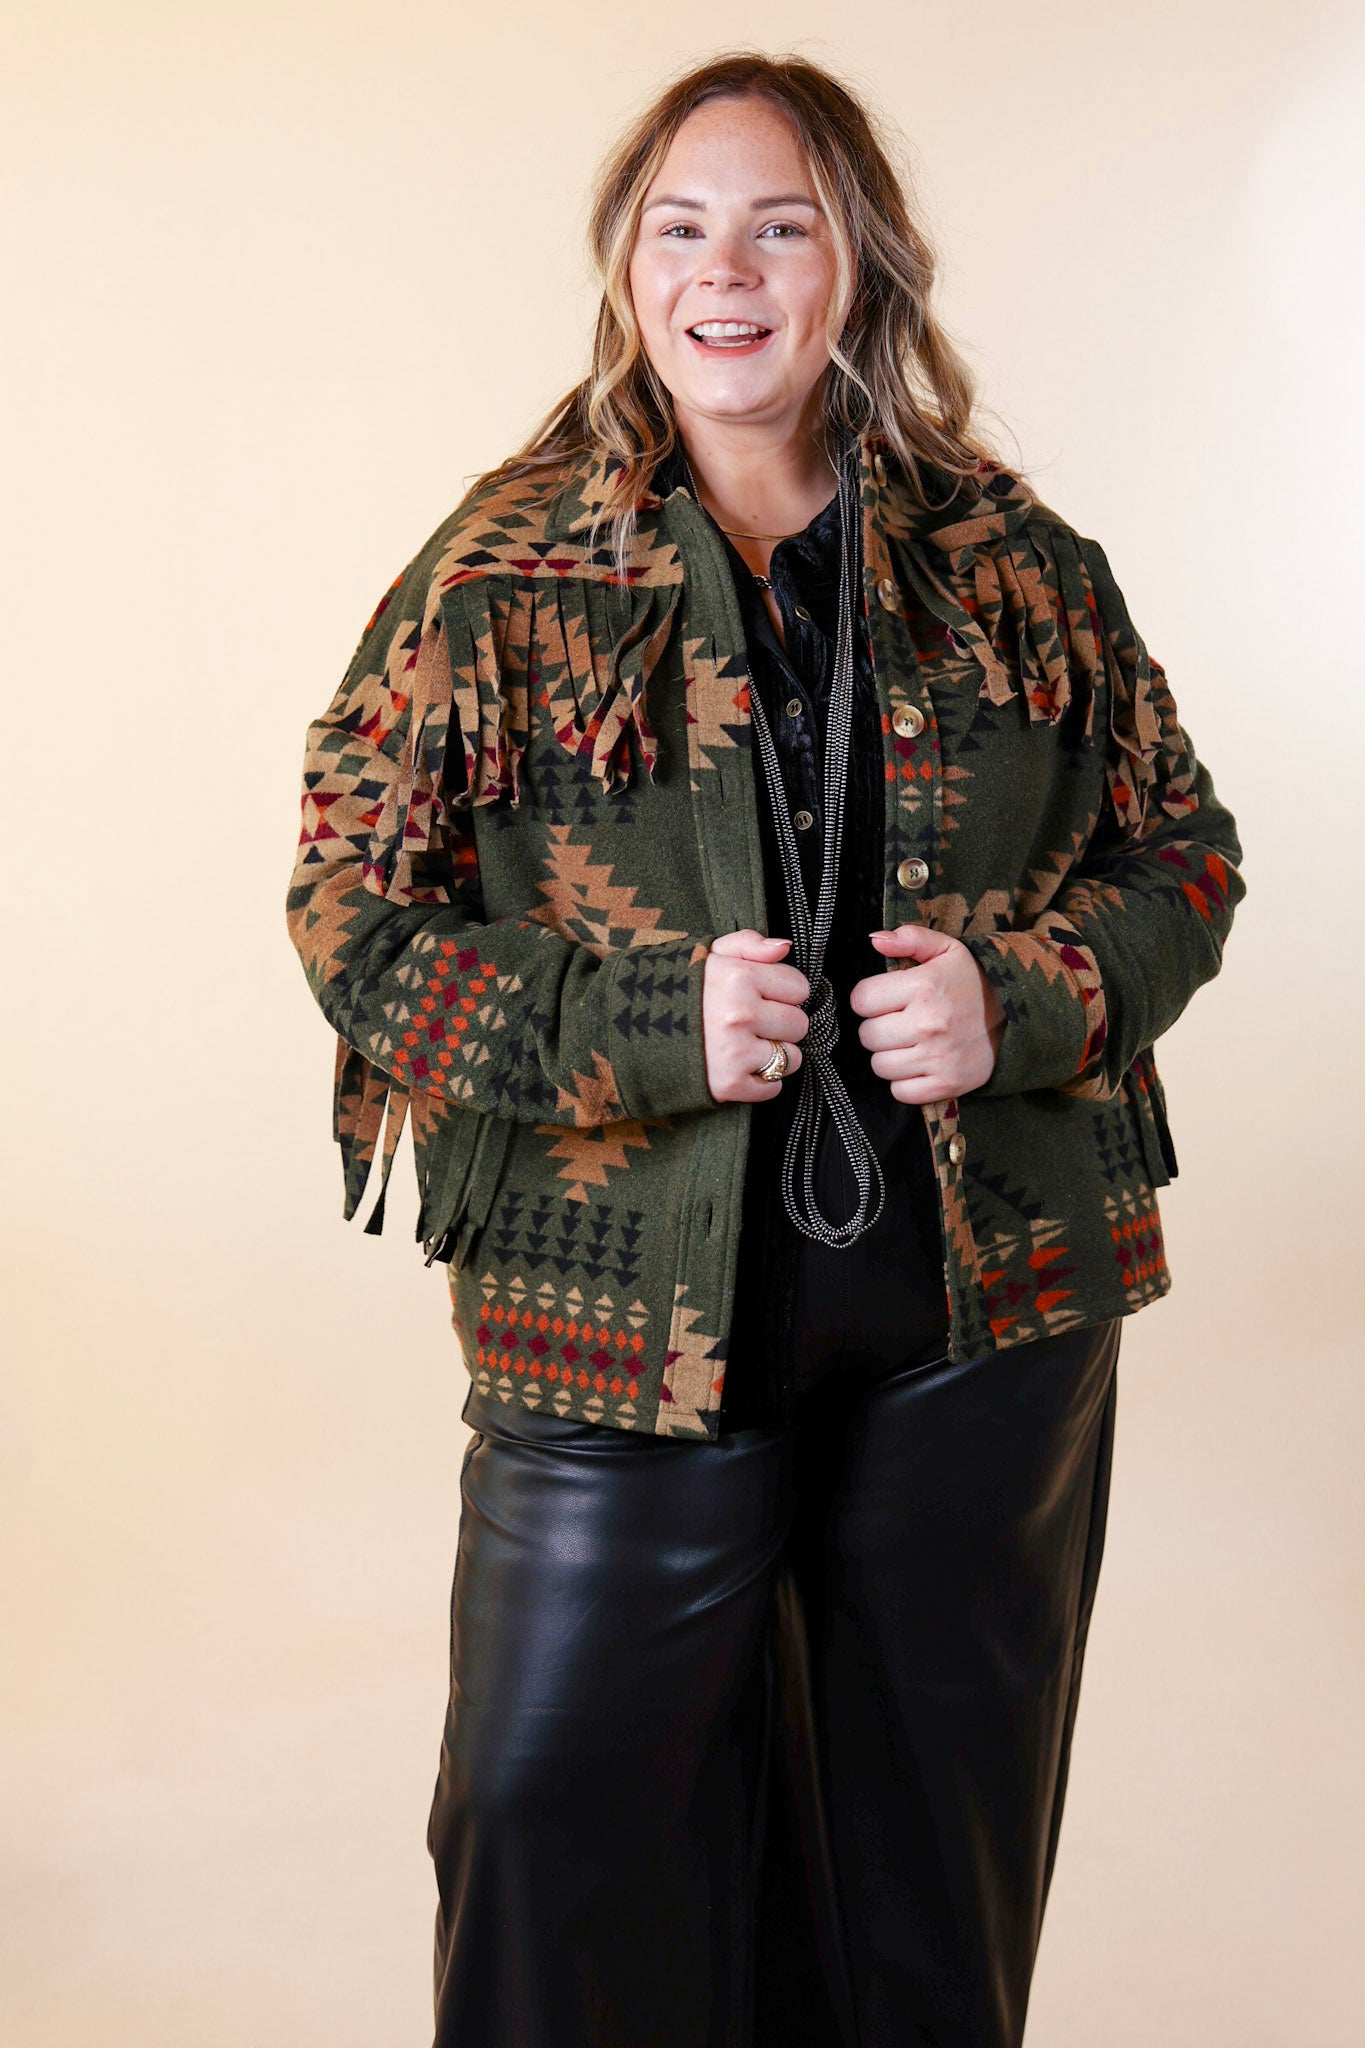 Take Over Aztec Print Button Up Jacket with Fringe in Olive Green - Giddy Up Glamour Boutique